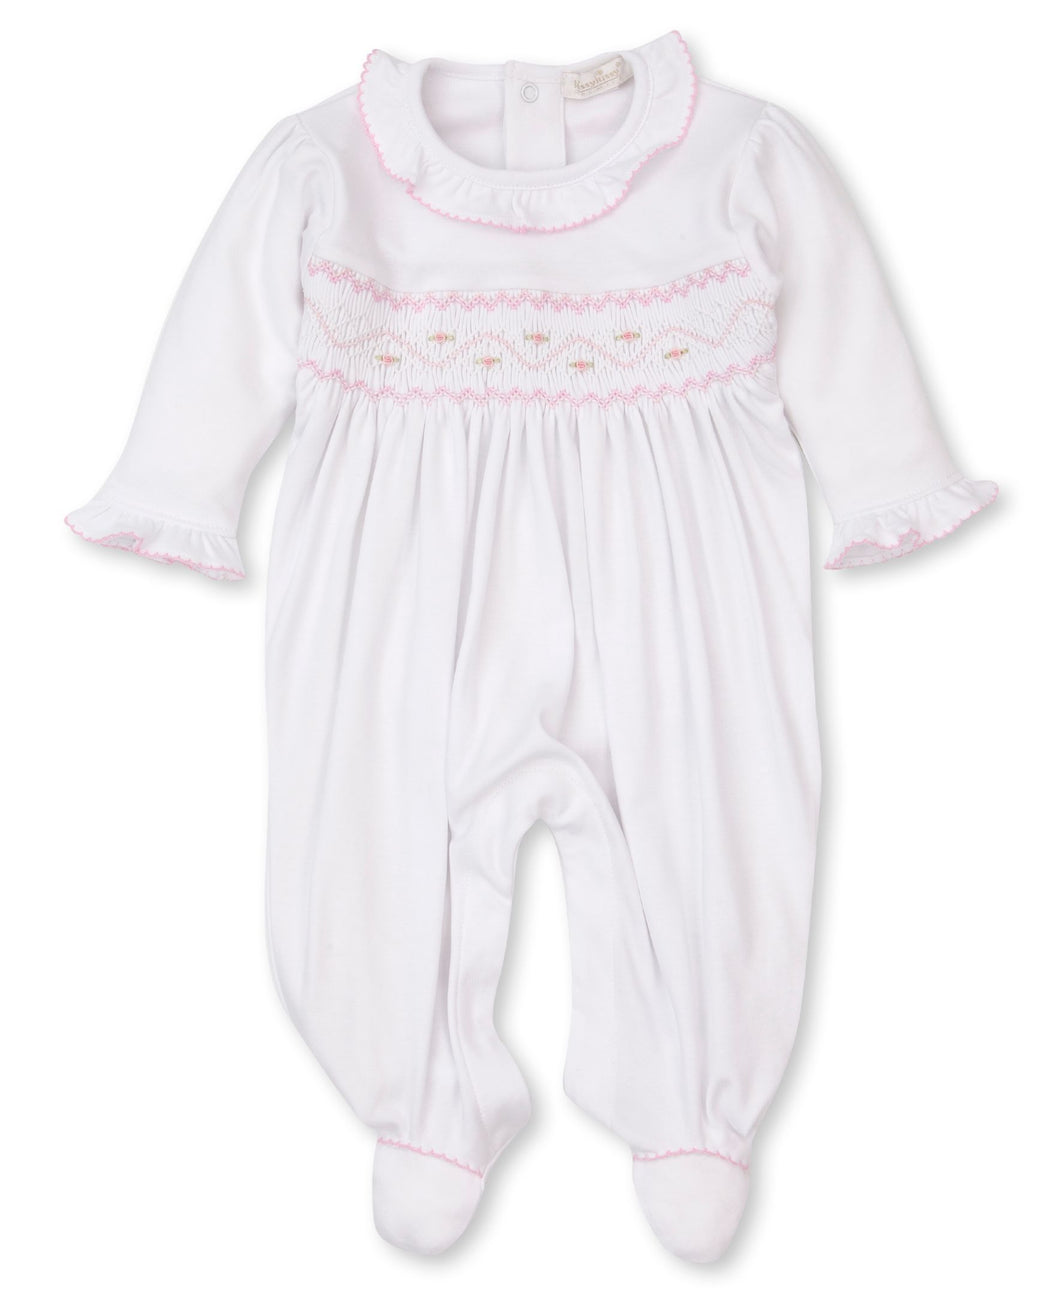 CLB Summer 21 Smocked White and Pink Footie